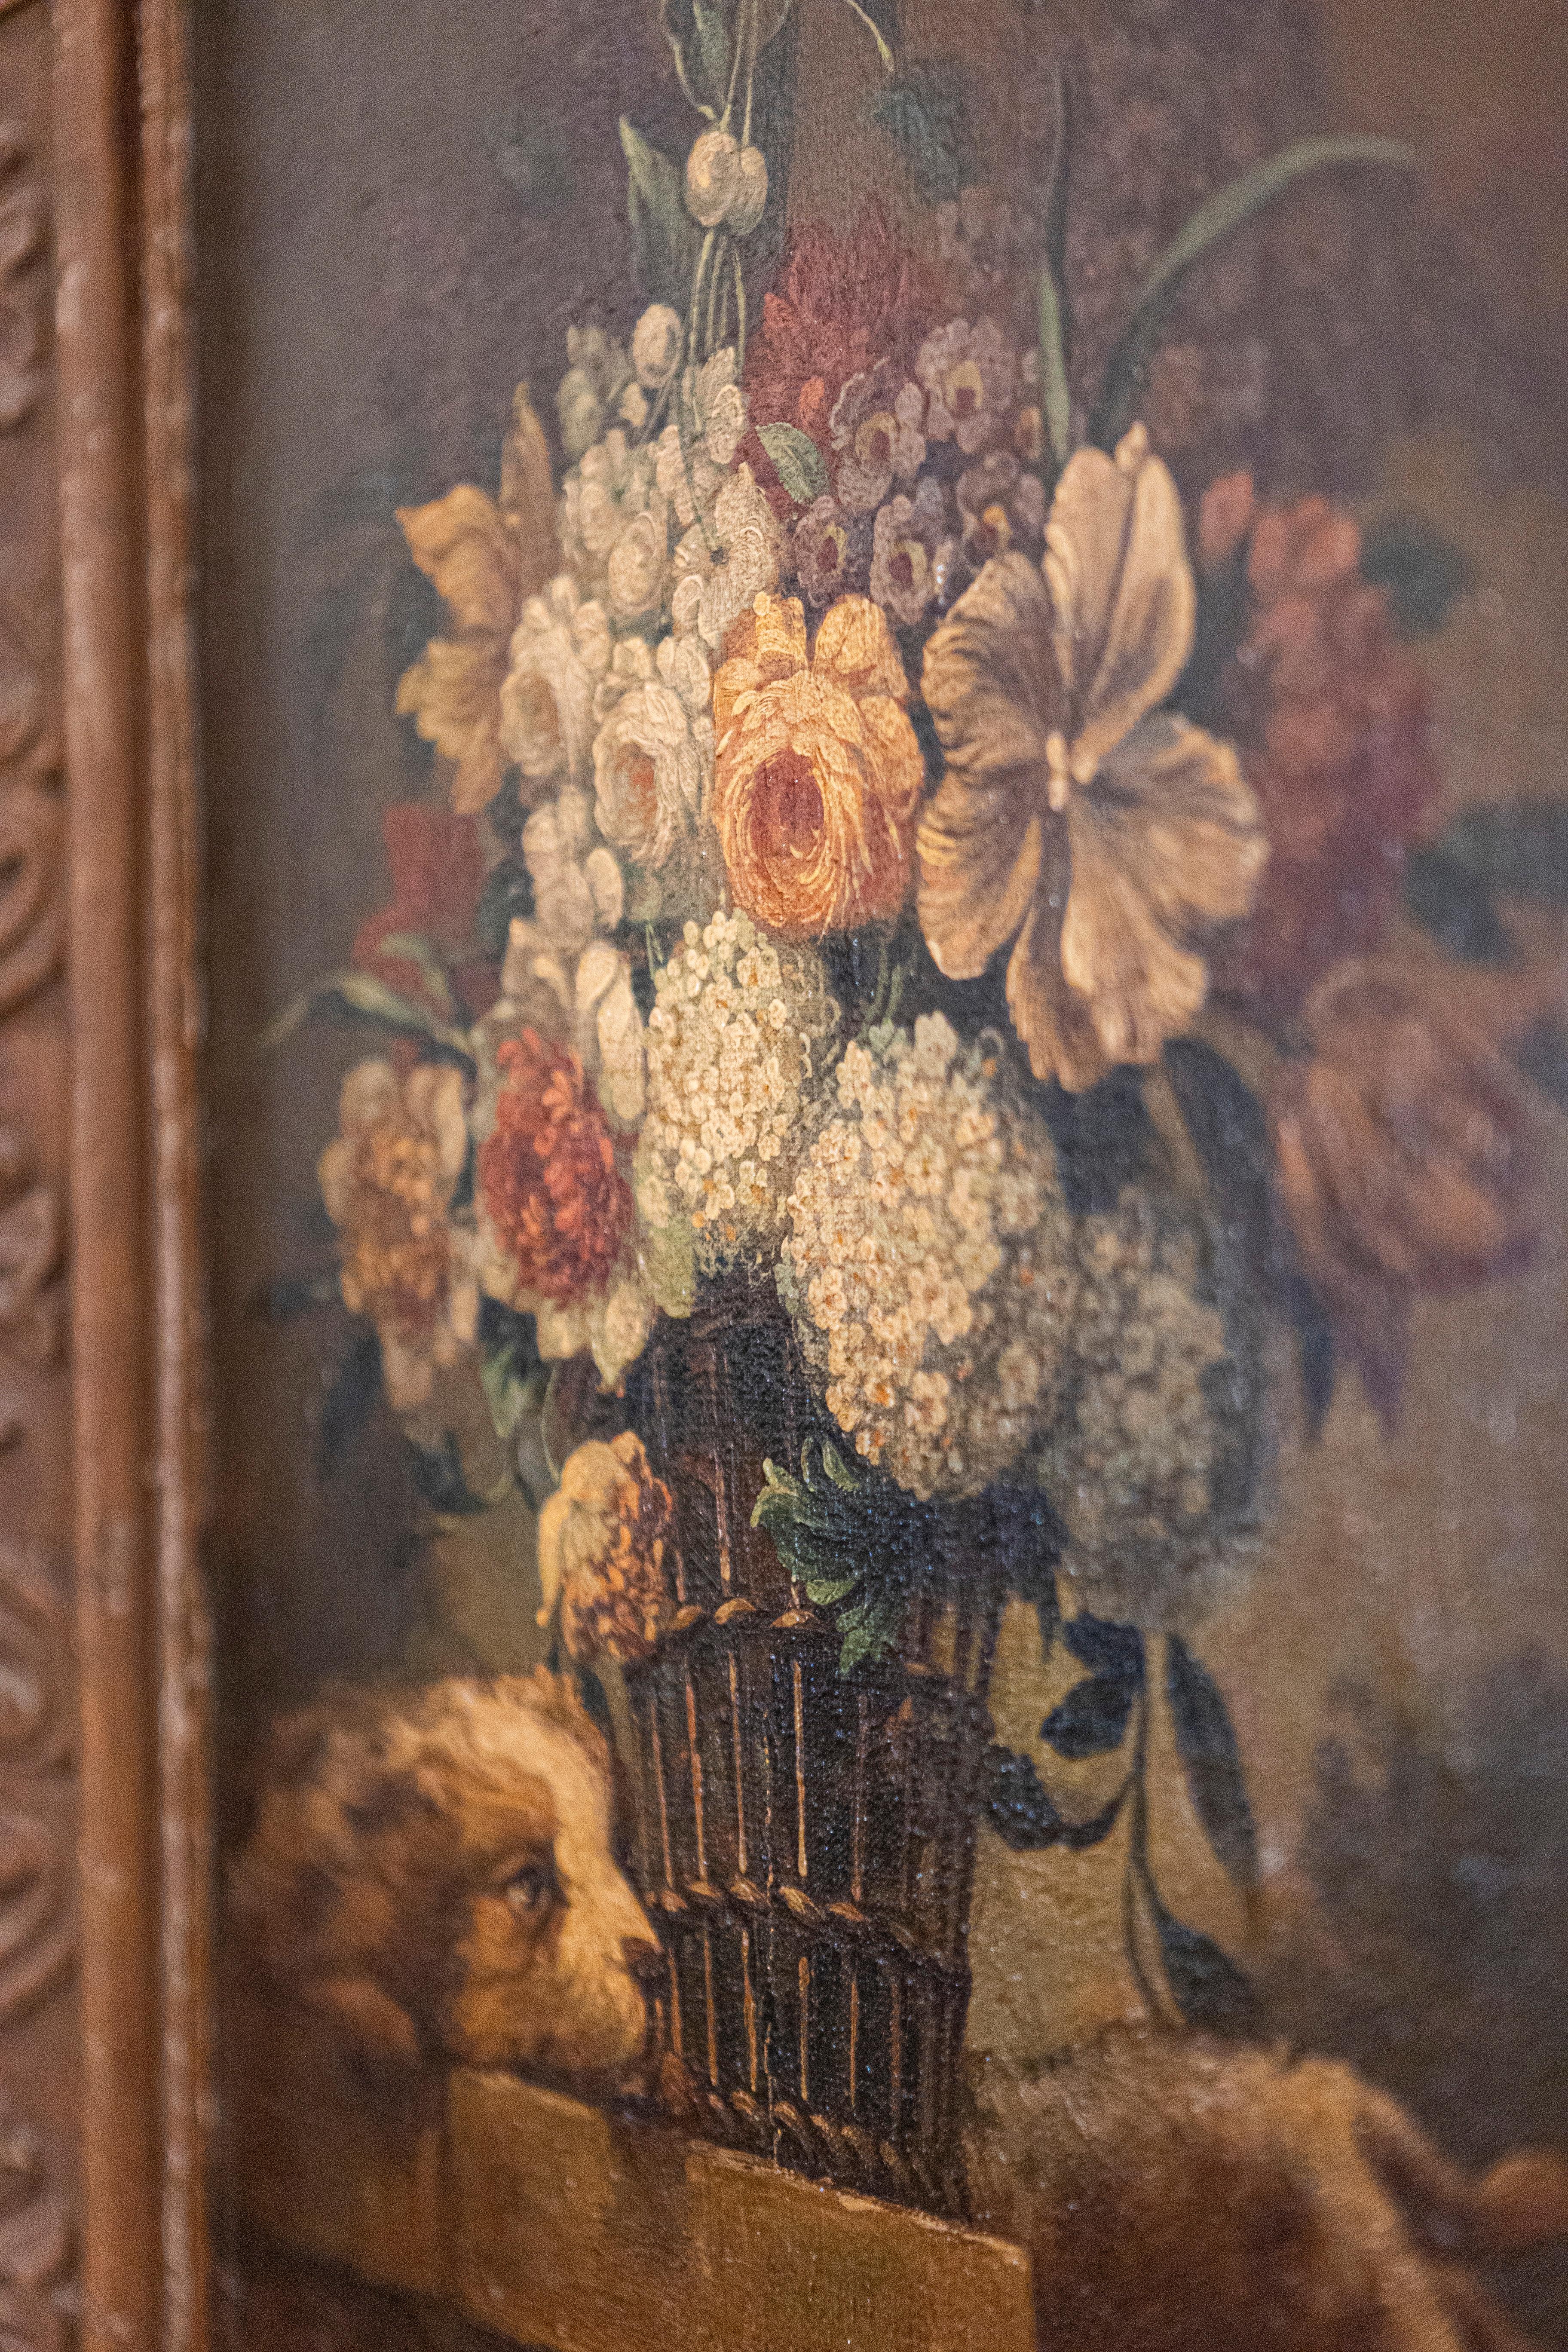 French 19th Century Framed Still-life Floral Painting with Dog and Rabbit Motifs For Sale 7